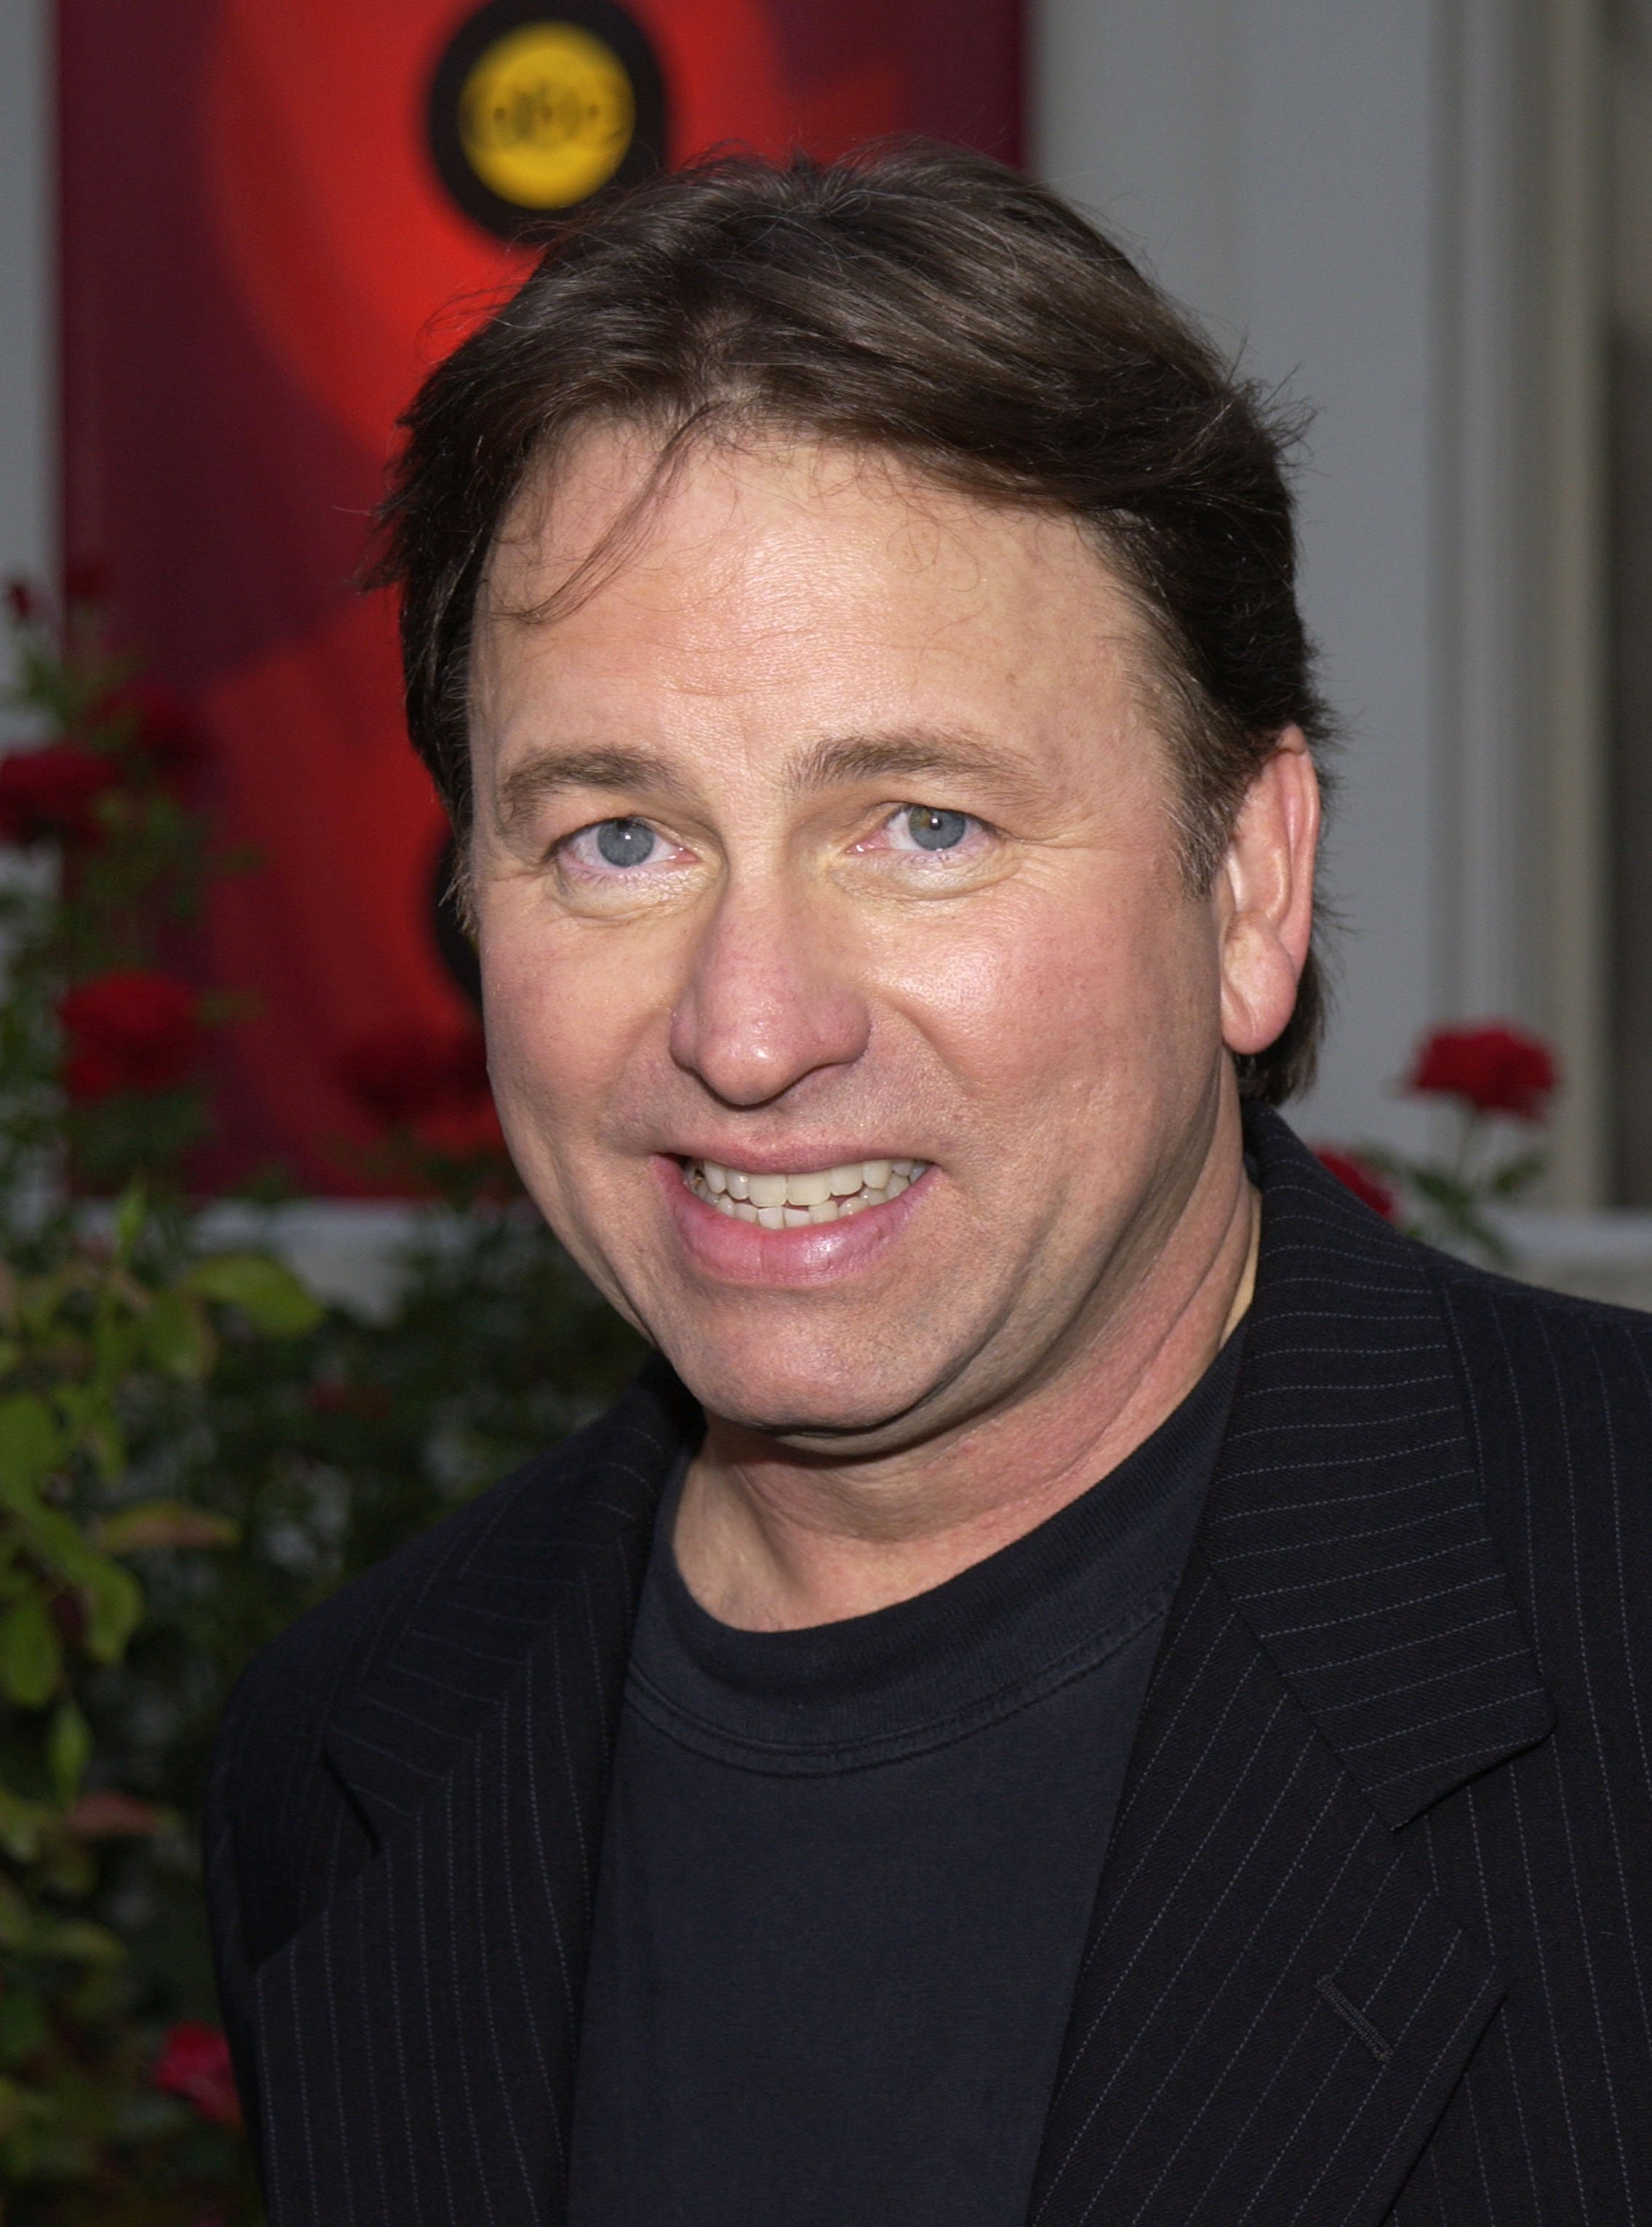 John Ritter in 2002 during a Summer Press Tour All - Star Party at Tournament House in Pasadena, California. | Source: Getty Images